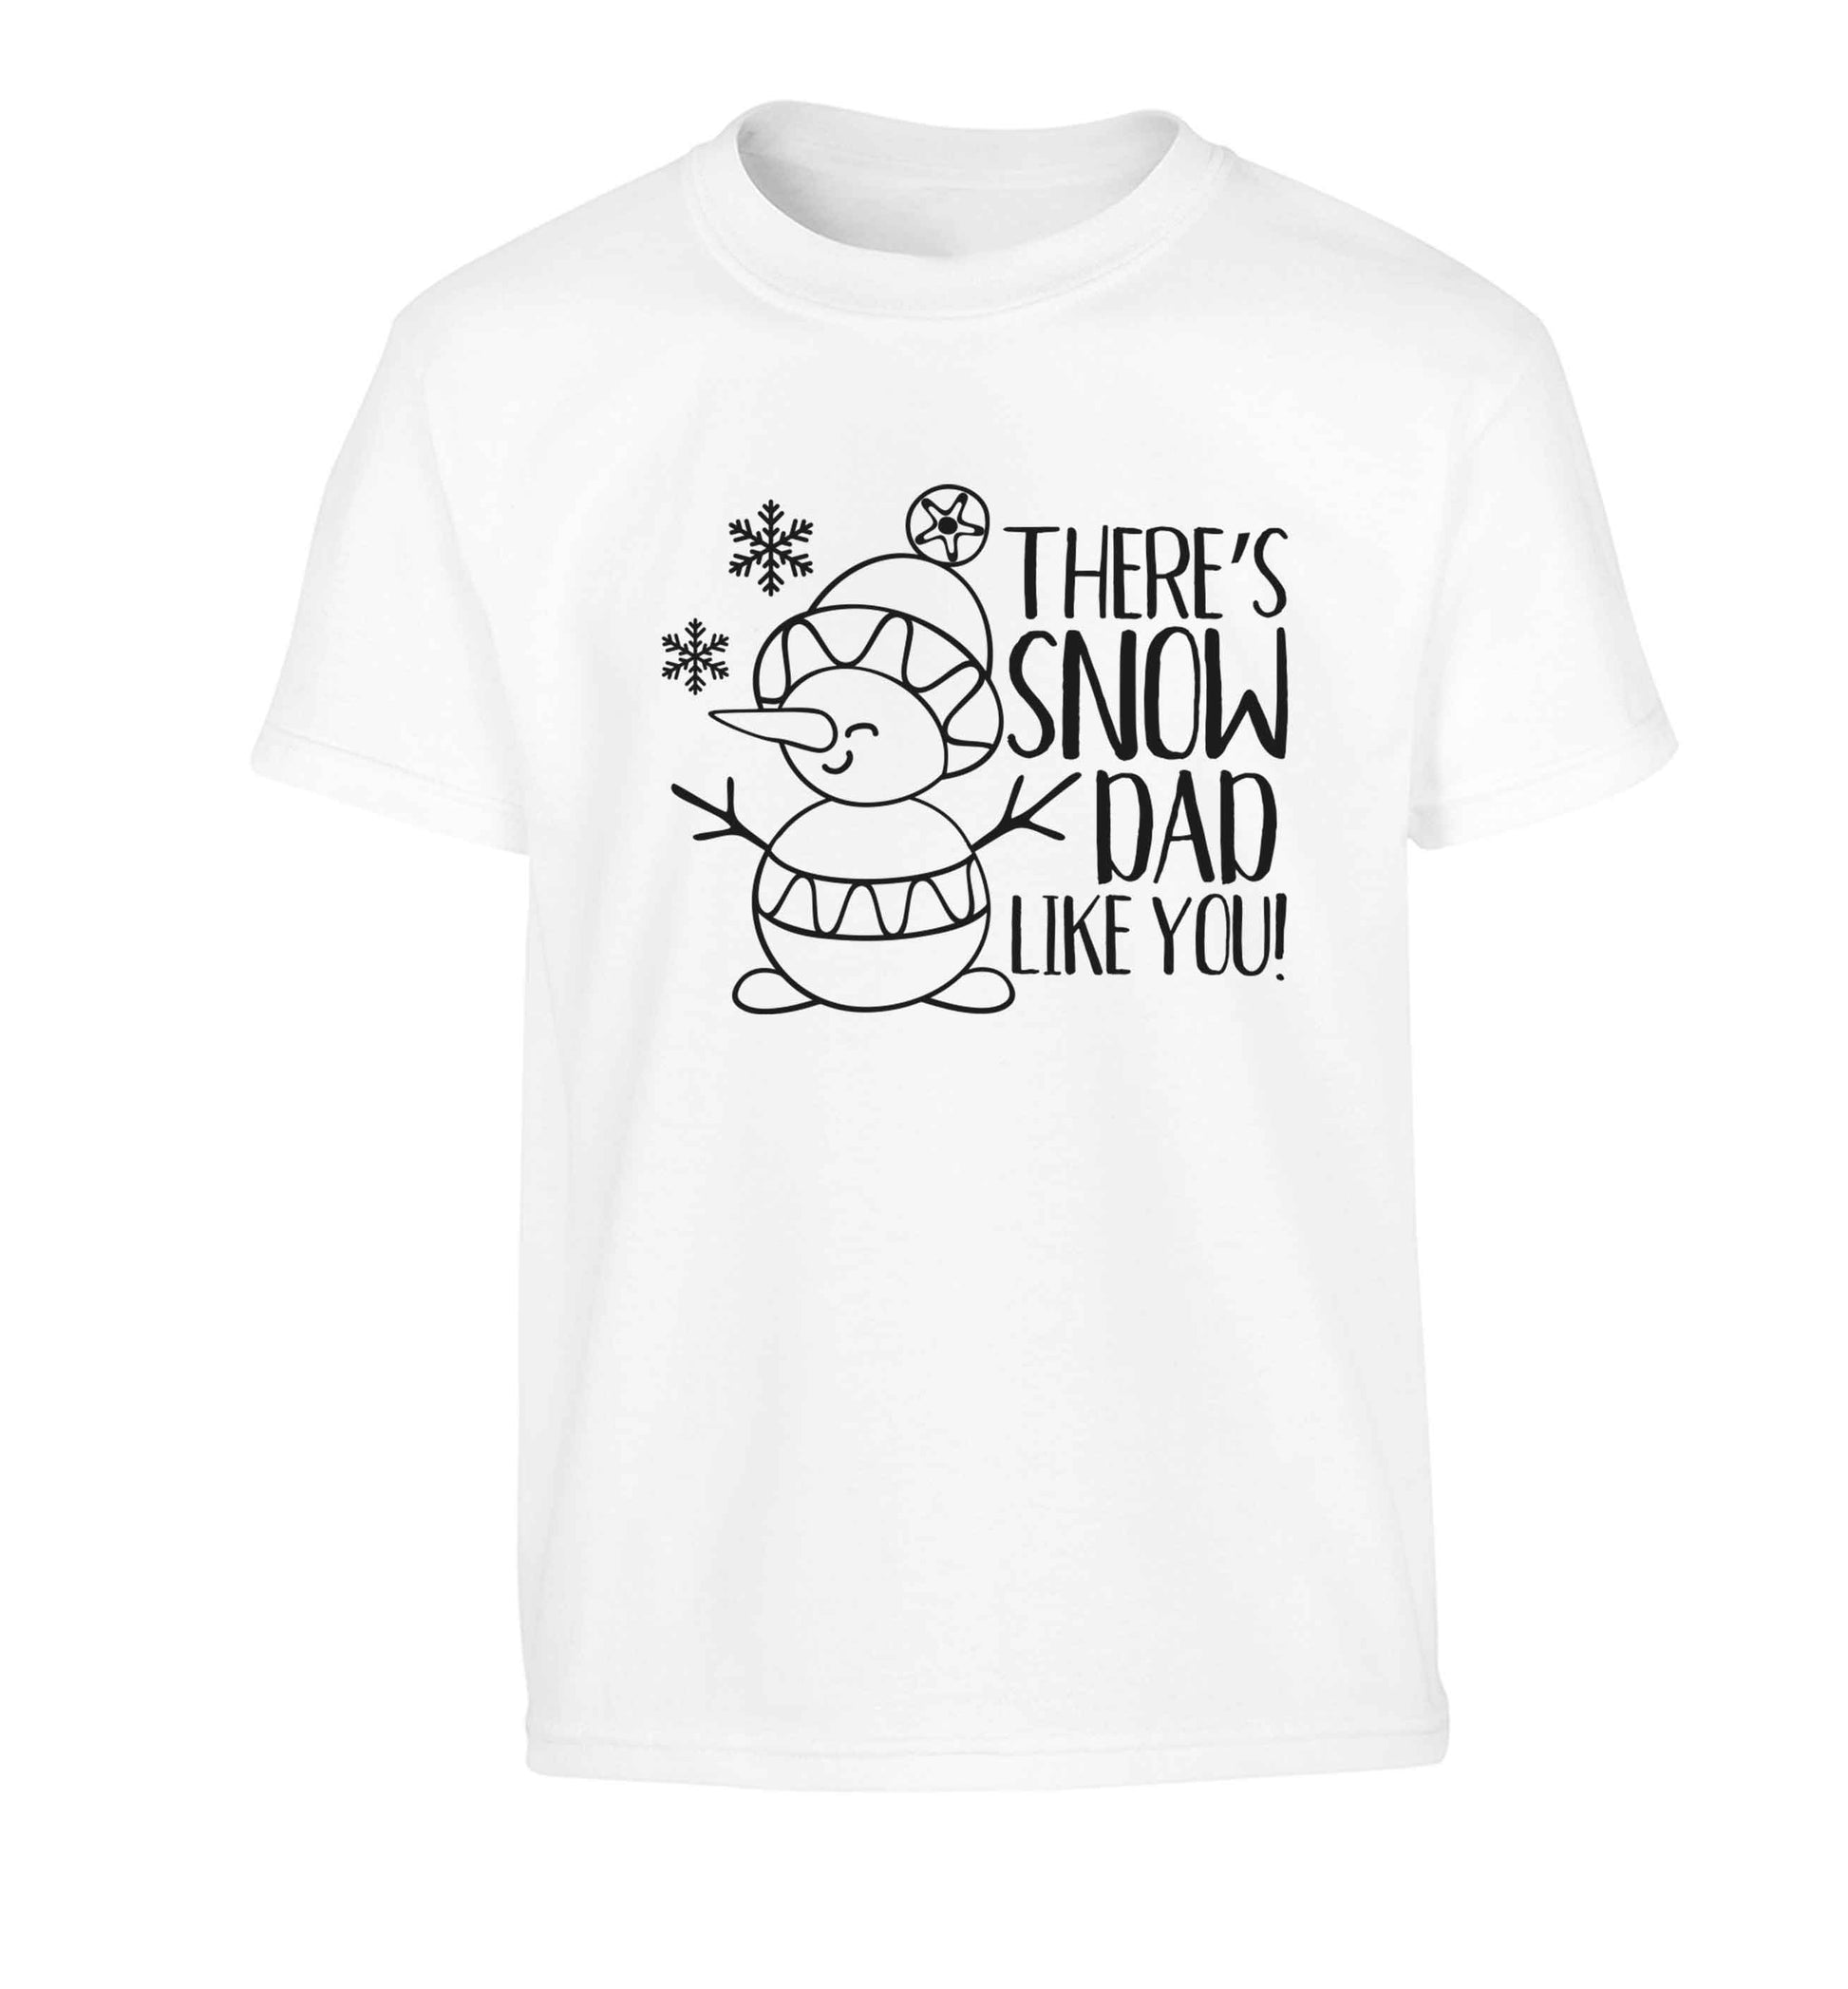 There's snow dad like you Children's white Tshirt 12-13 Years